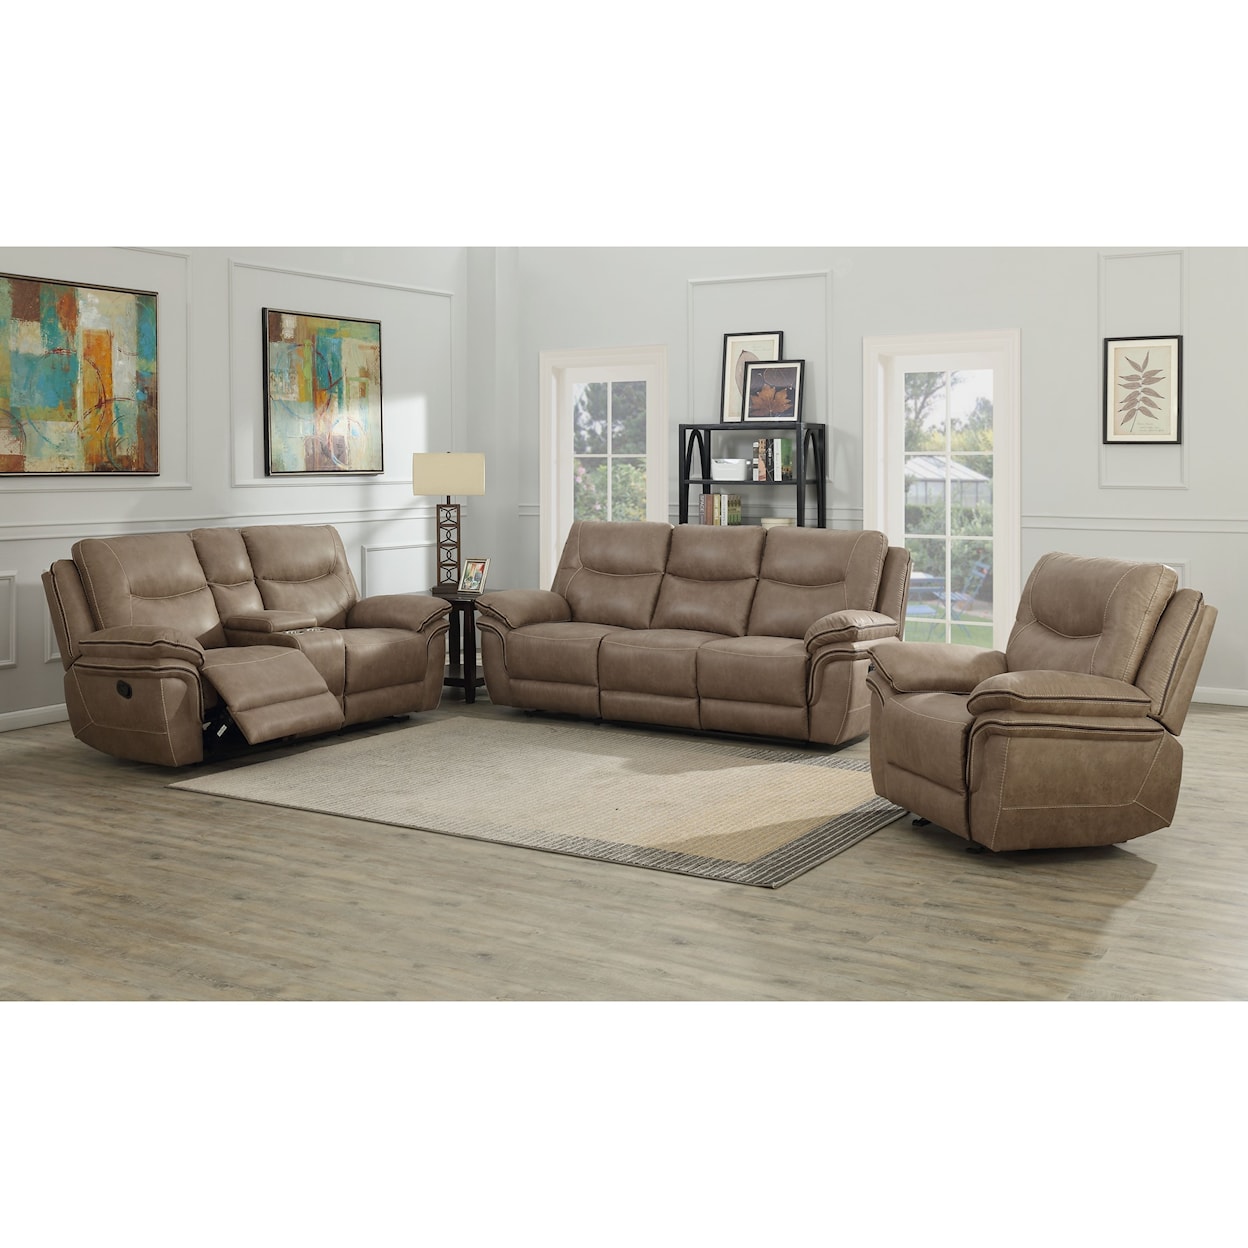 Steve Silver Isabella Reclining Living Room Group